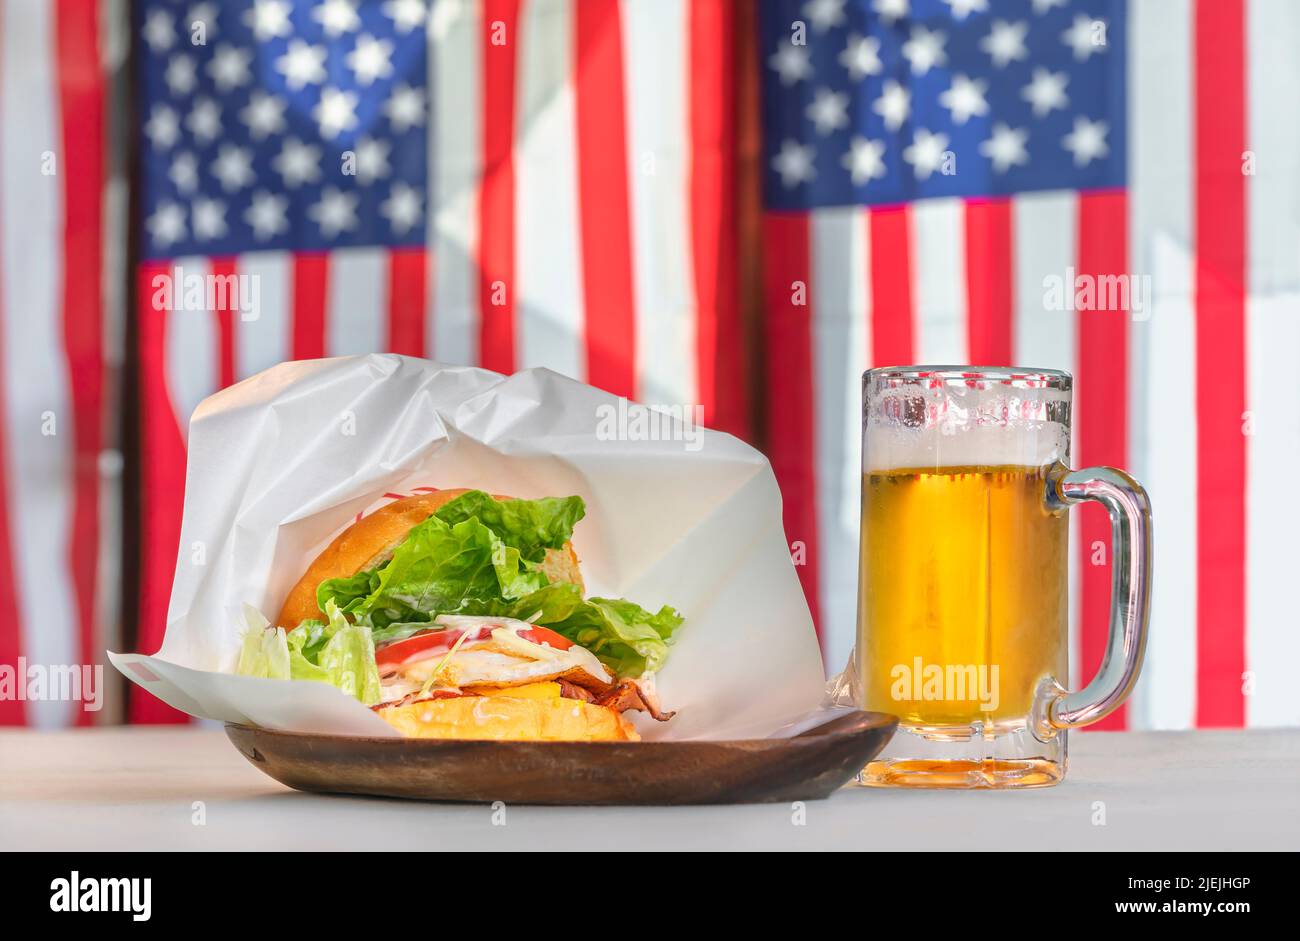 Delicious Sasebo burger with juicy patty and lettuce in sesame seed buns served on a wooden plate with a pint of lager against national flag of the un Stock Photo